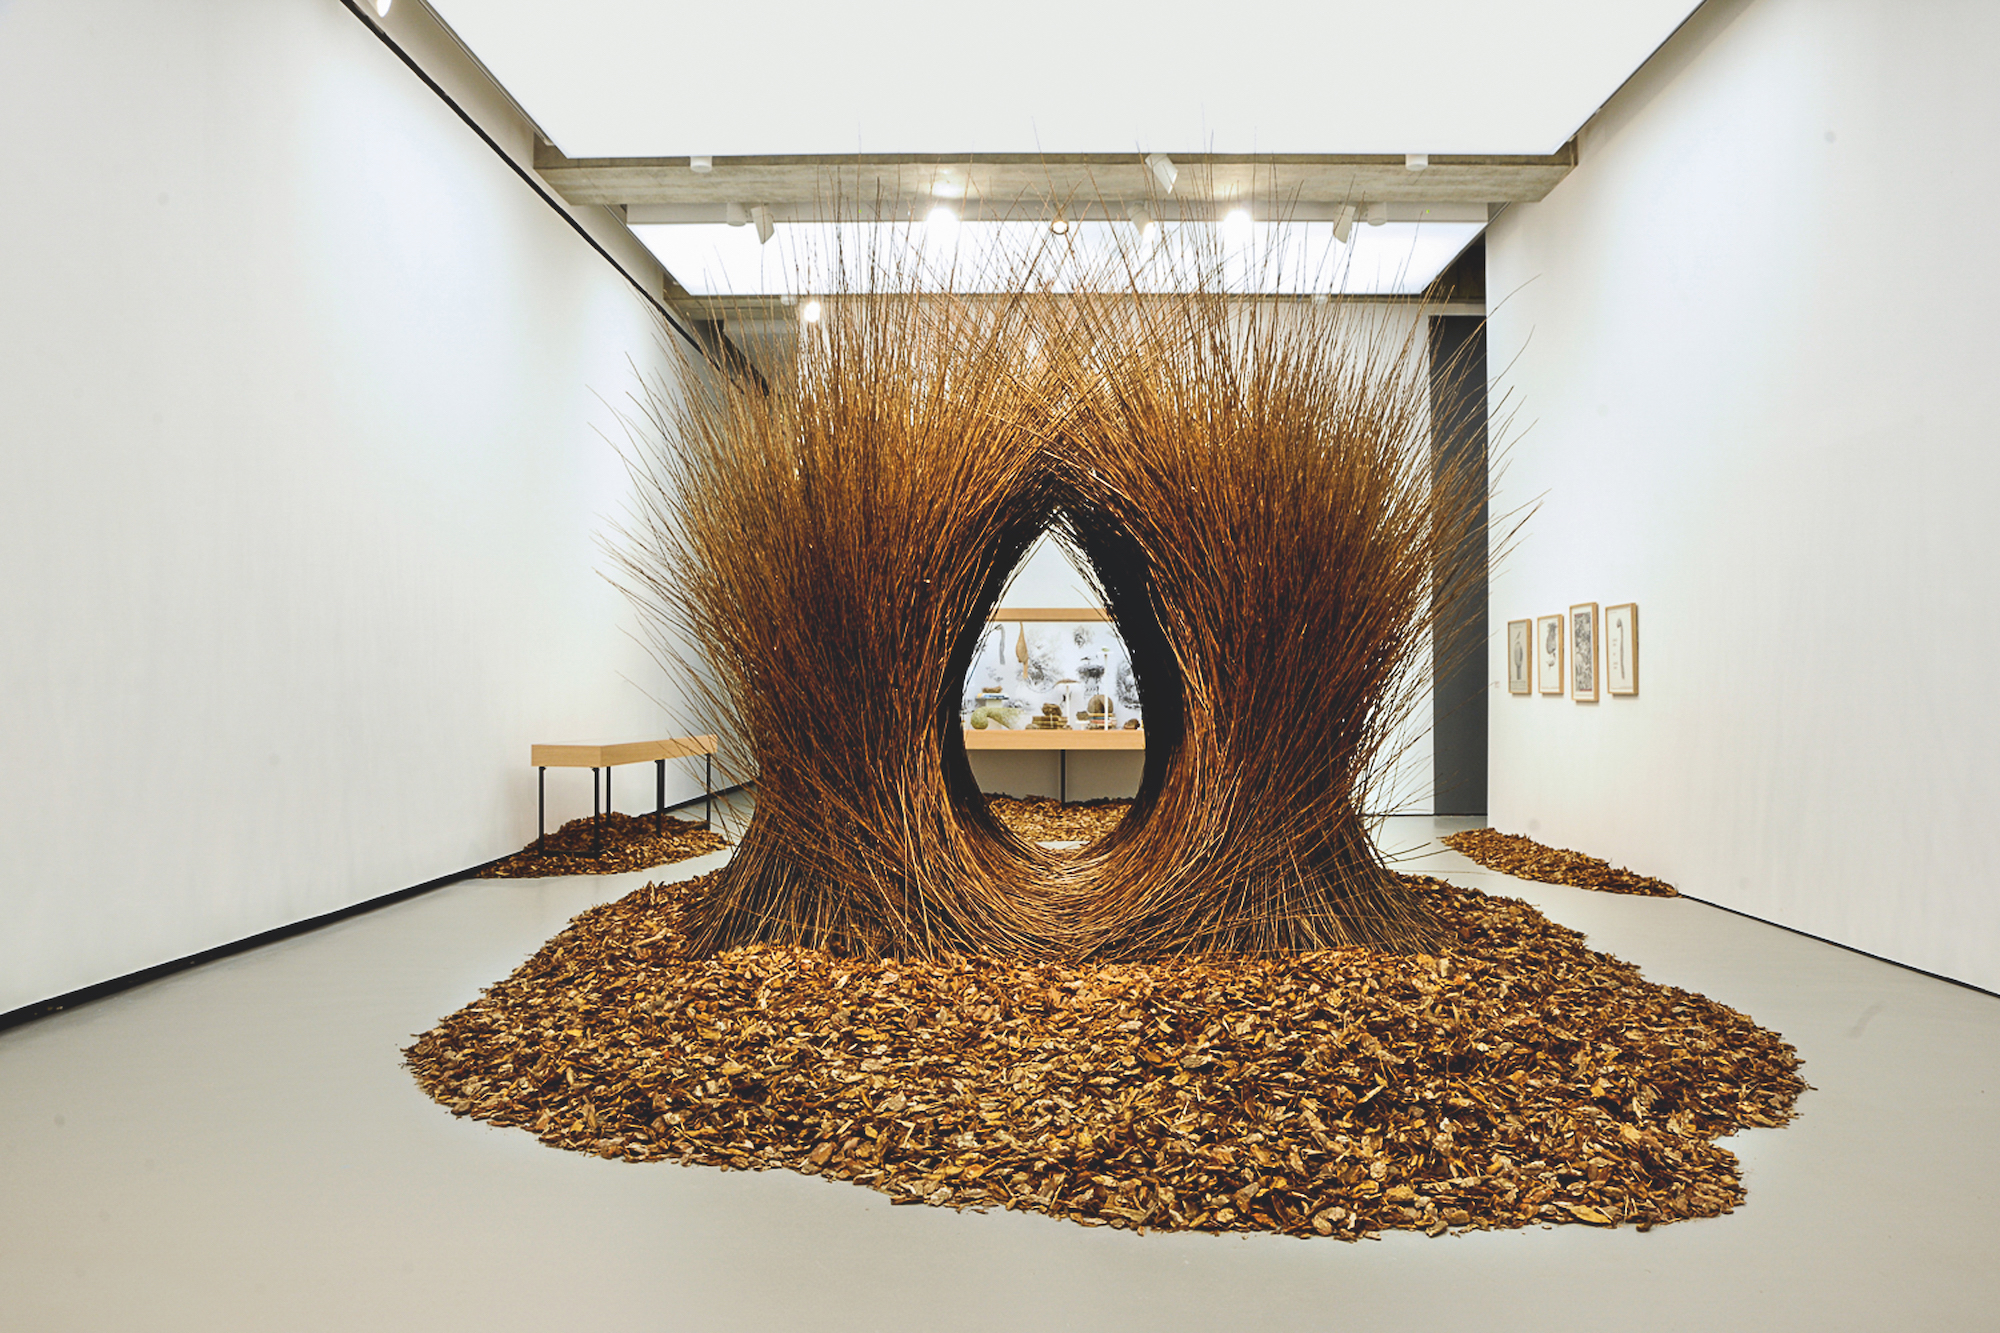 Andy Holden and Peter Holden, Natural Selection, 2018. Mixed media, Temporary installation at Towner Art Gallery, Eastbourne, UK. Andy Holden/Photograph by Alison Bettles